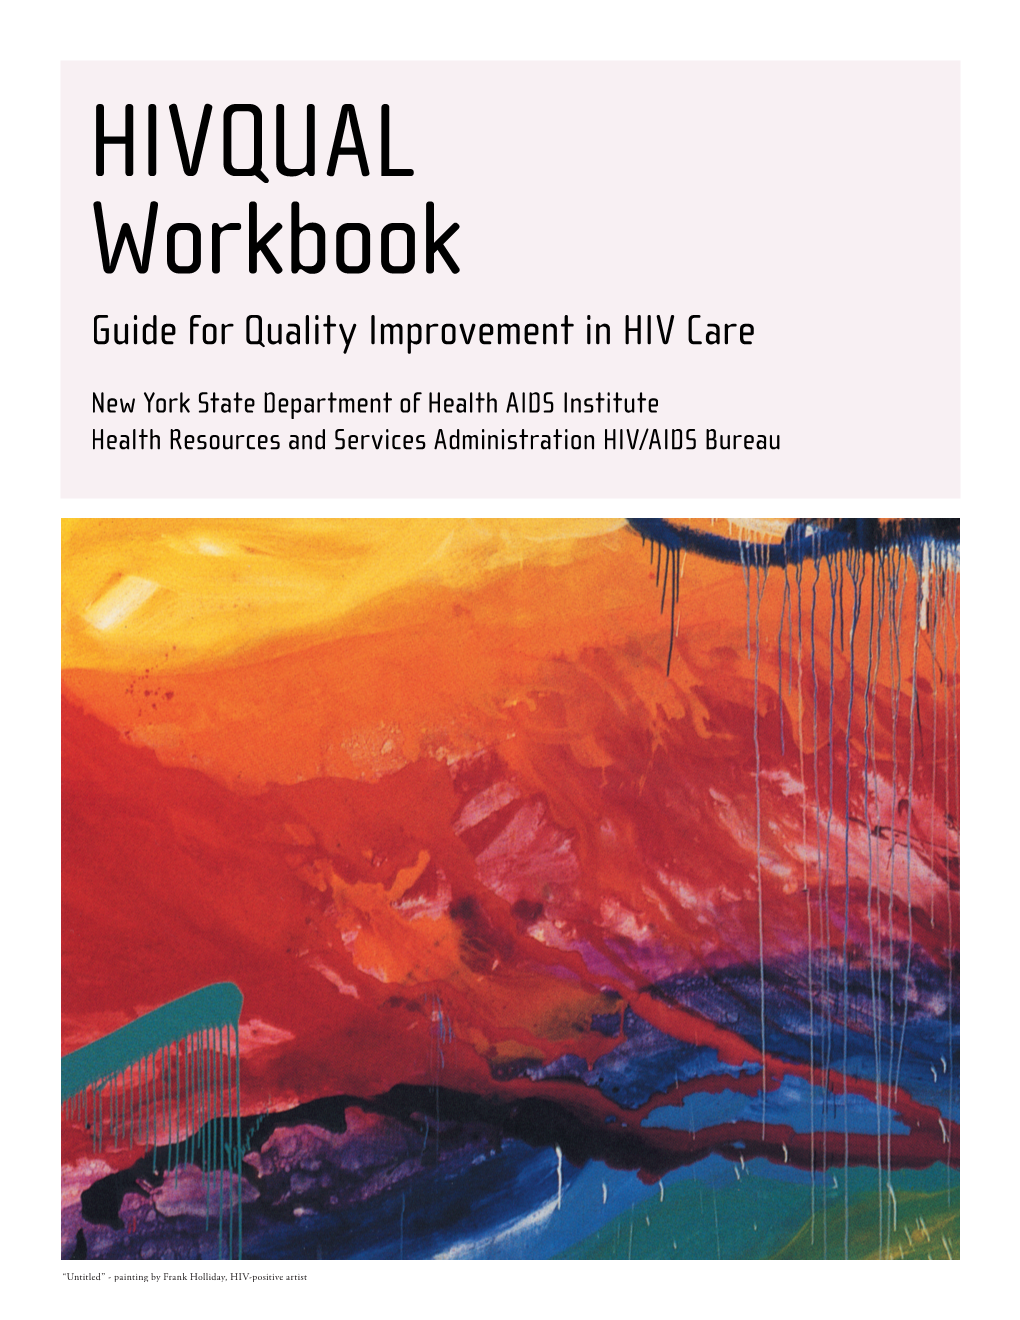 HIVQUAL Workbook Guide for Quality Improvement in HIV Care